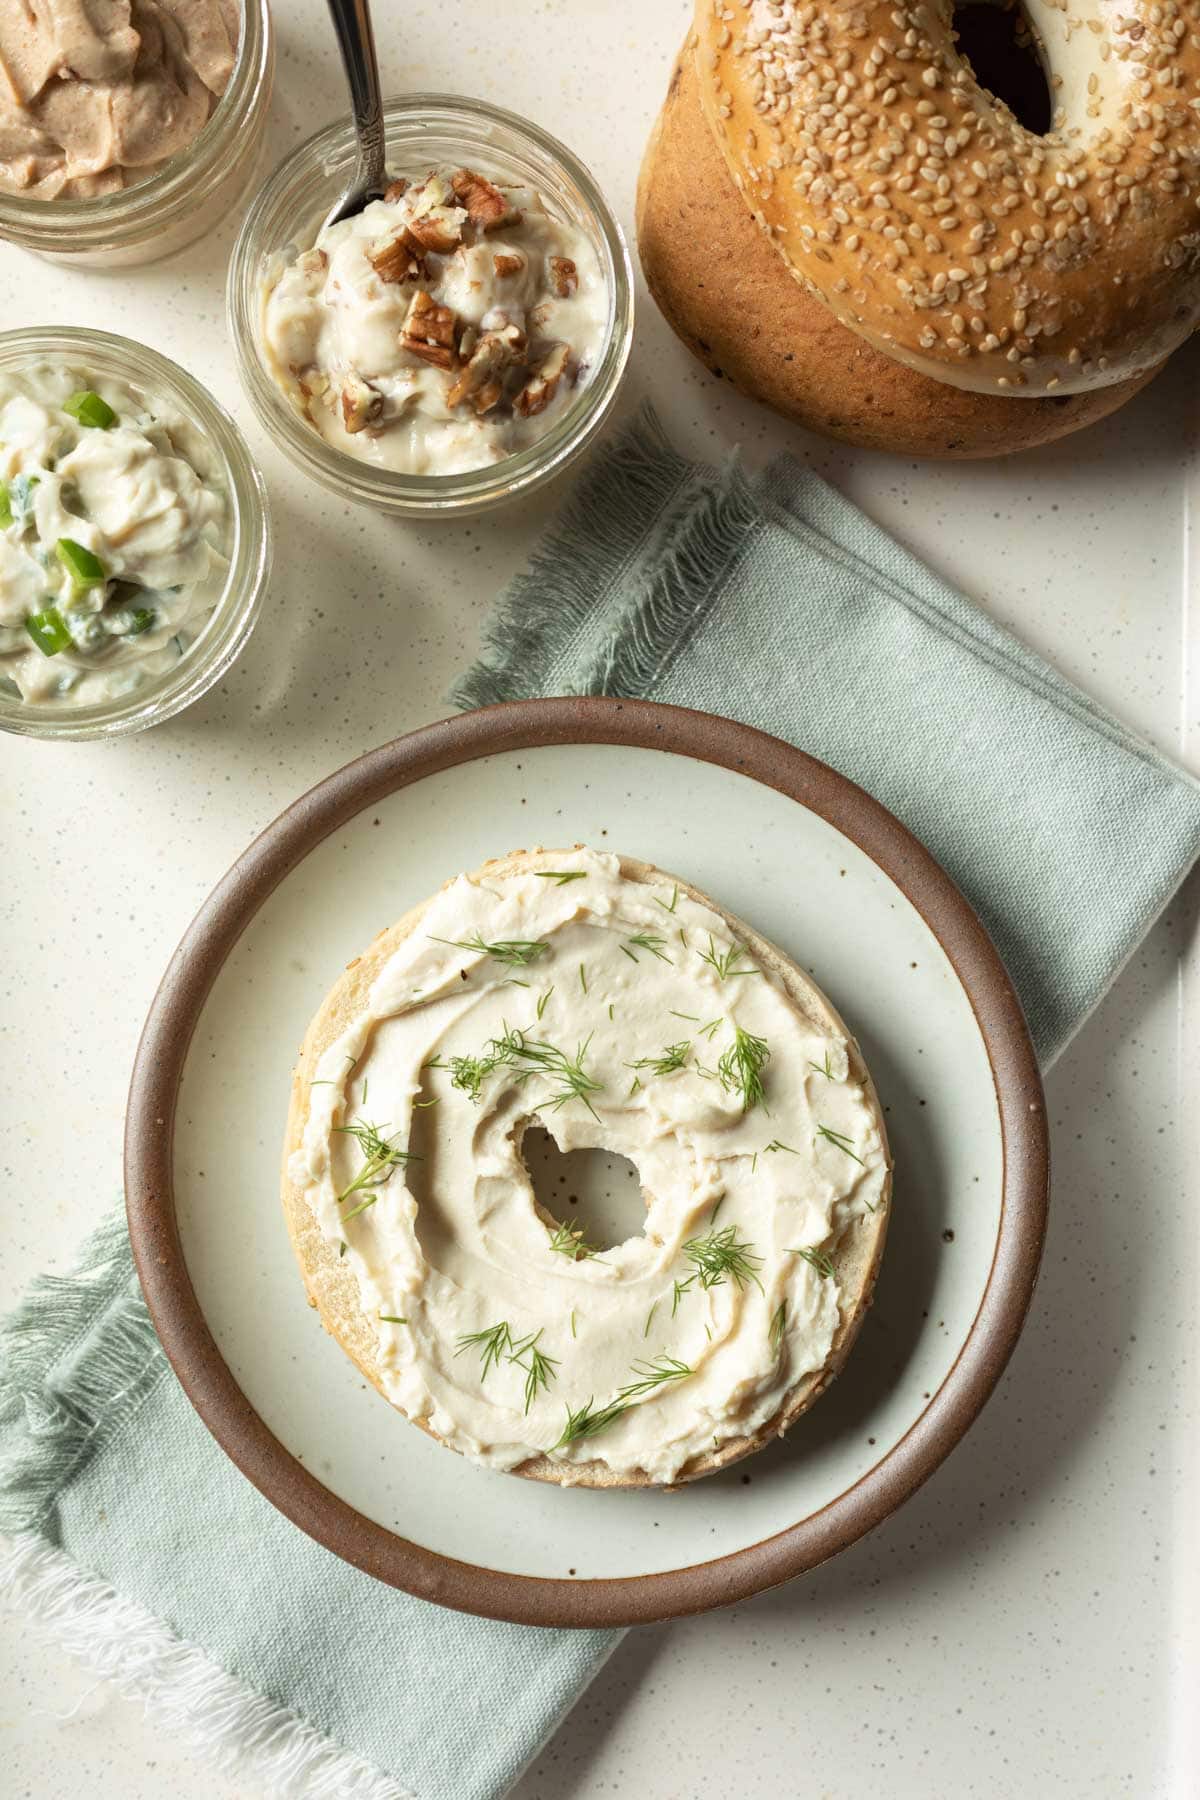 Tofu-oat cream cheese on half a bagel with more bagels and flavored vegan cream cheese in background.